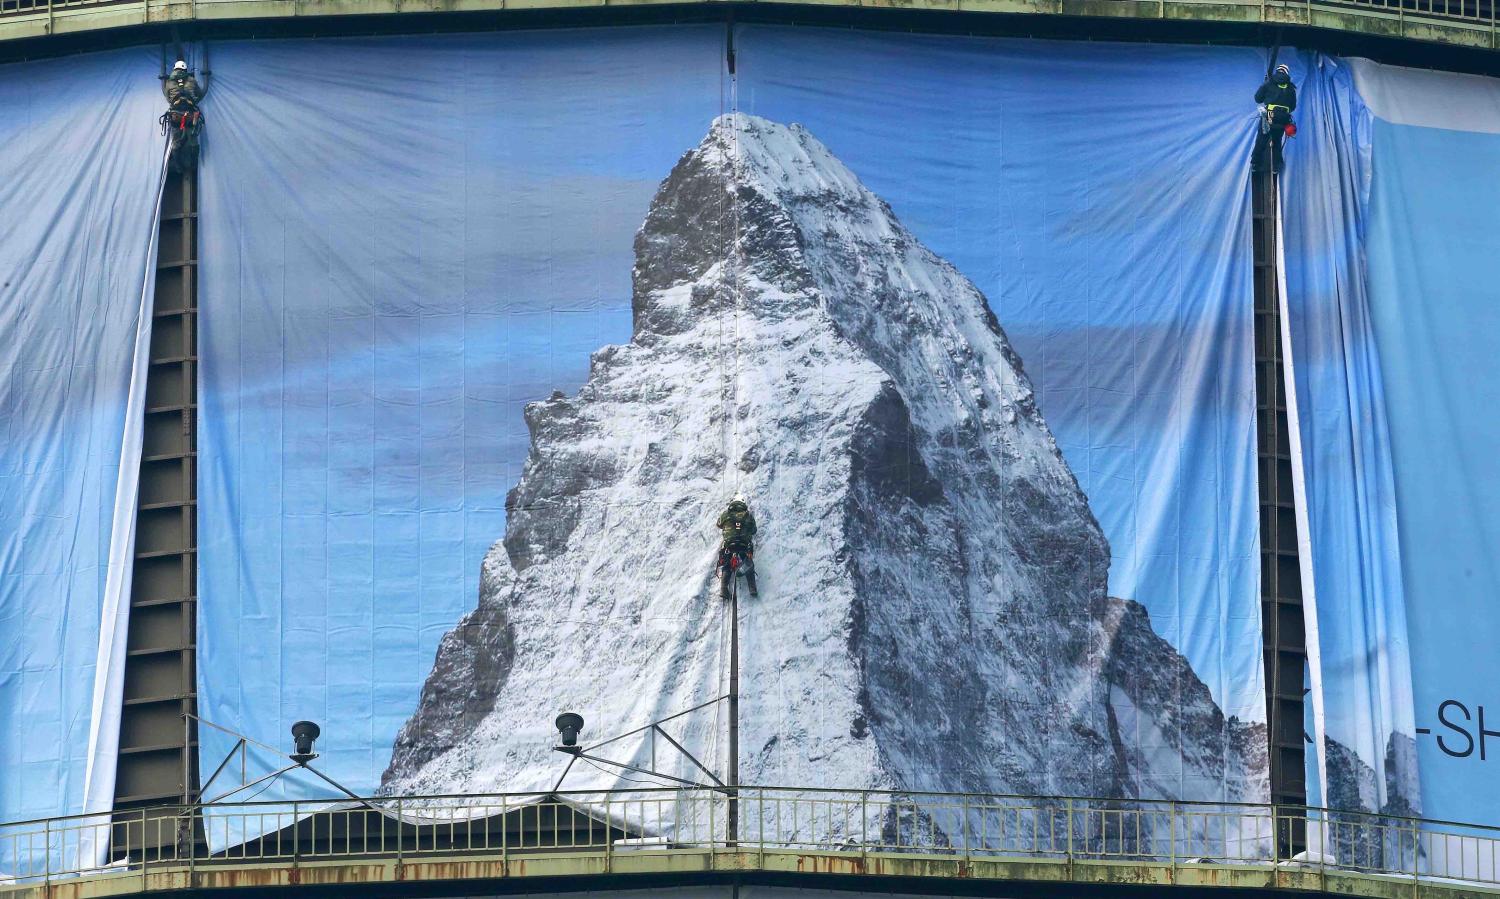 Workers hang a 1400 square-metre banner to promote the exhibition “The Call of the Mountains” on 2 March (Roland Weihrauch/Getty)